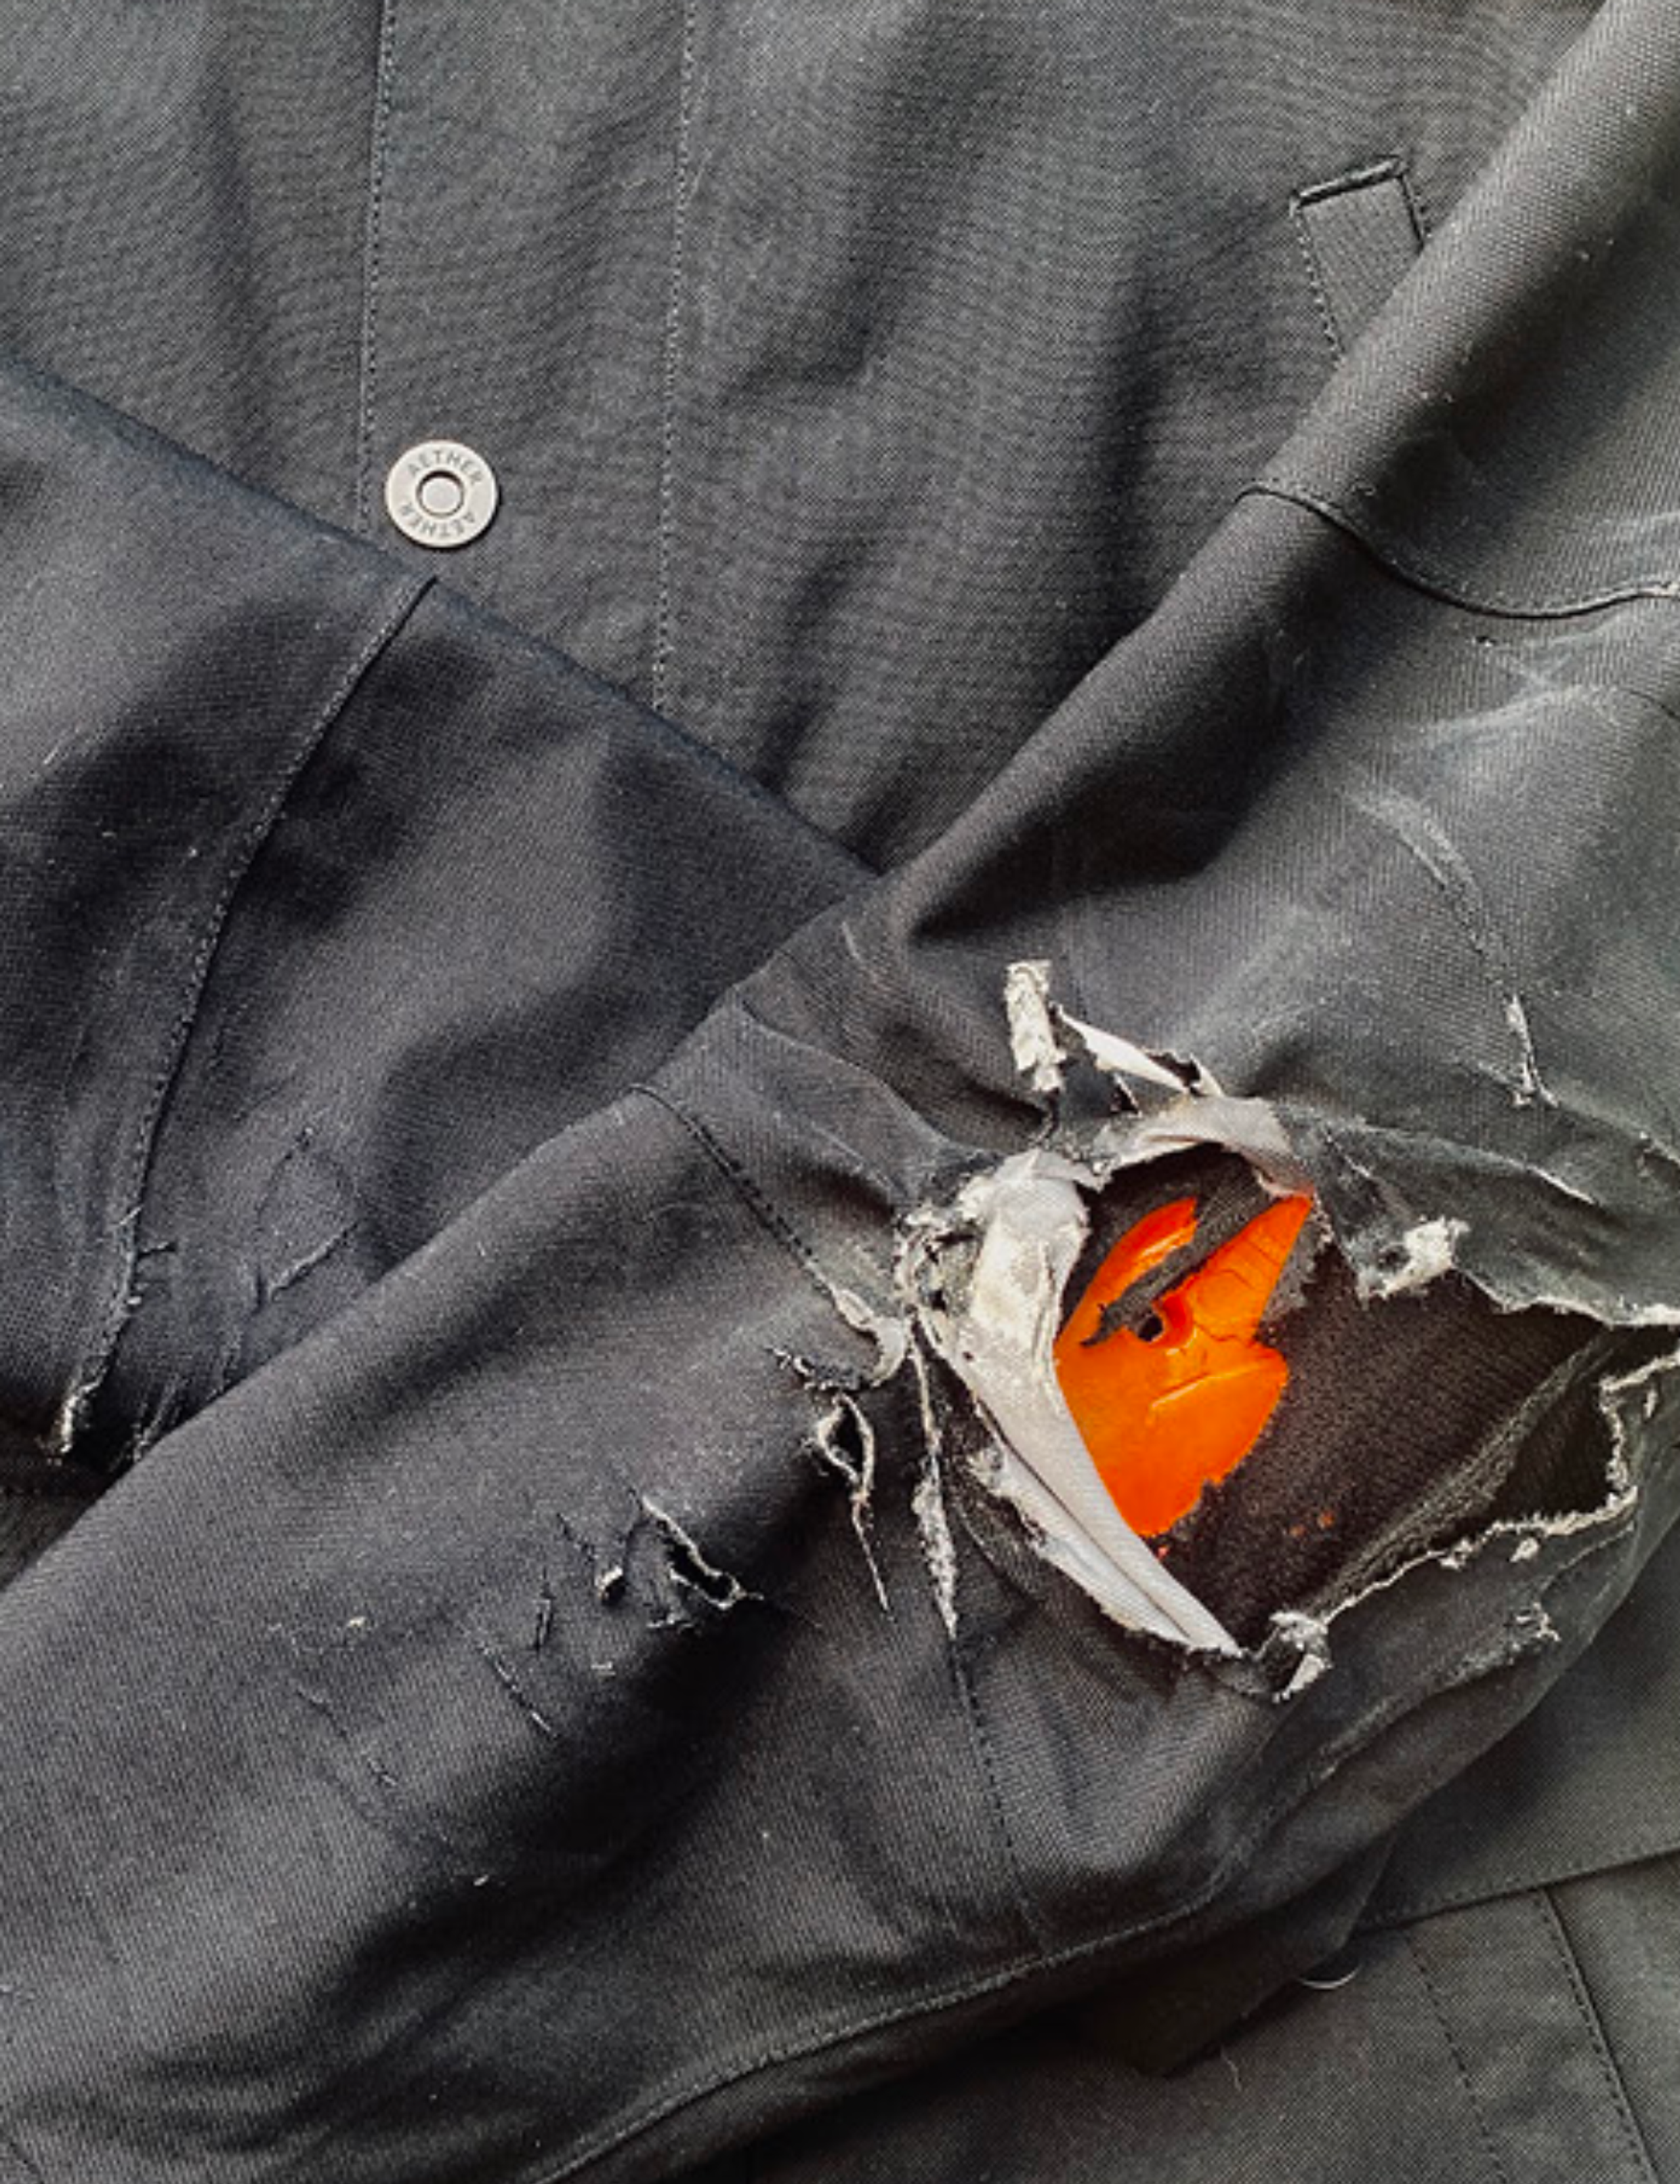 Ripped motorcycle jacket exposing D3O® pads underneath